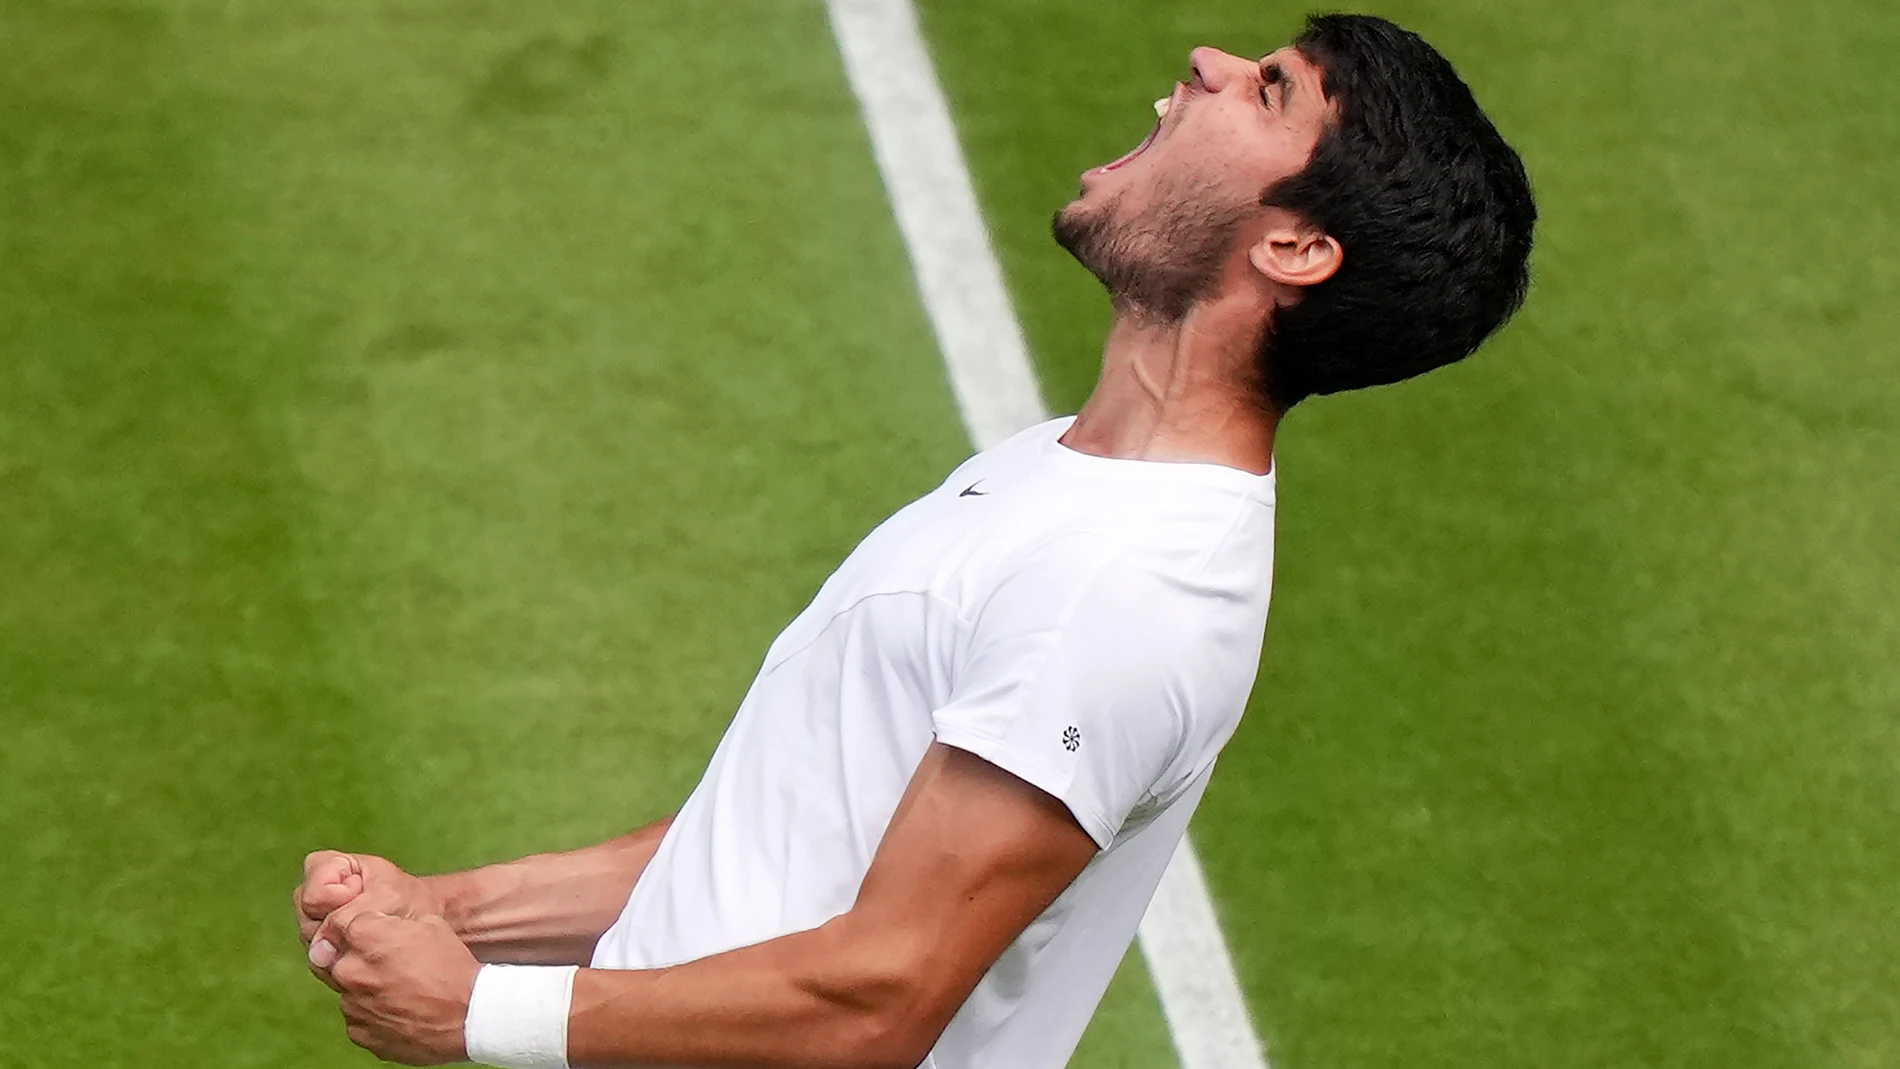 Spain's Carlos Alcaraz reacts after beating Denmark's Holger Rune to win their men's singles match on day ten of the Wimbledon tennis championships in London, Wednesday, July 12, 2023. (AP Photo/Alberto Pezzali)